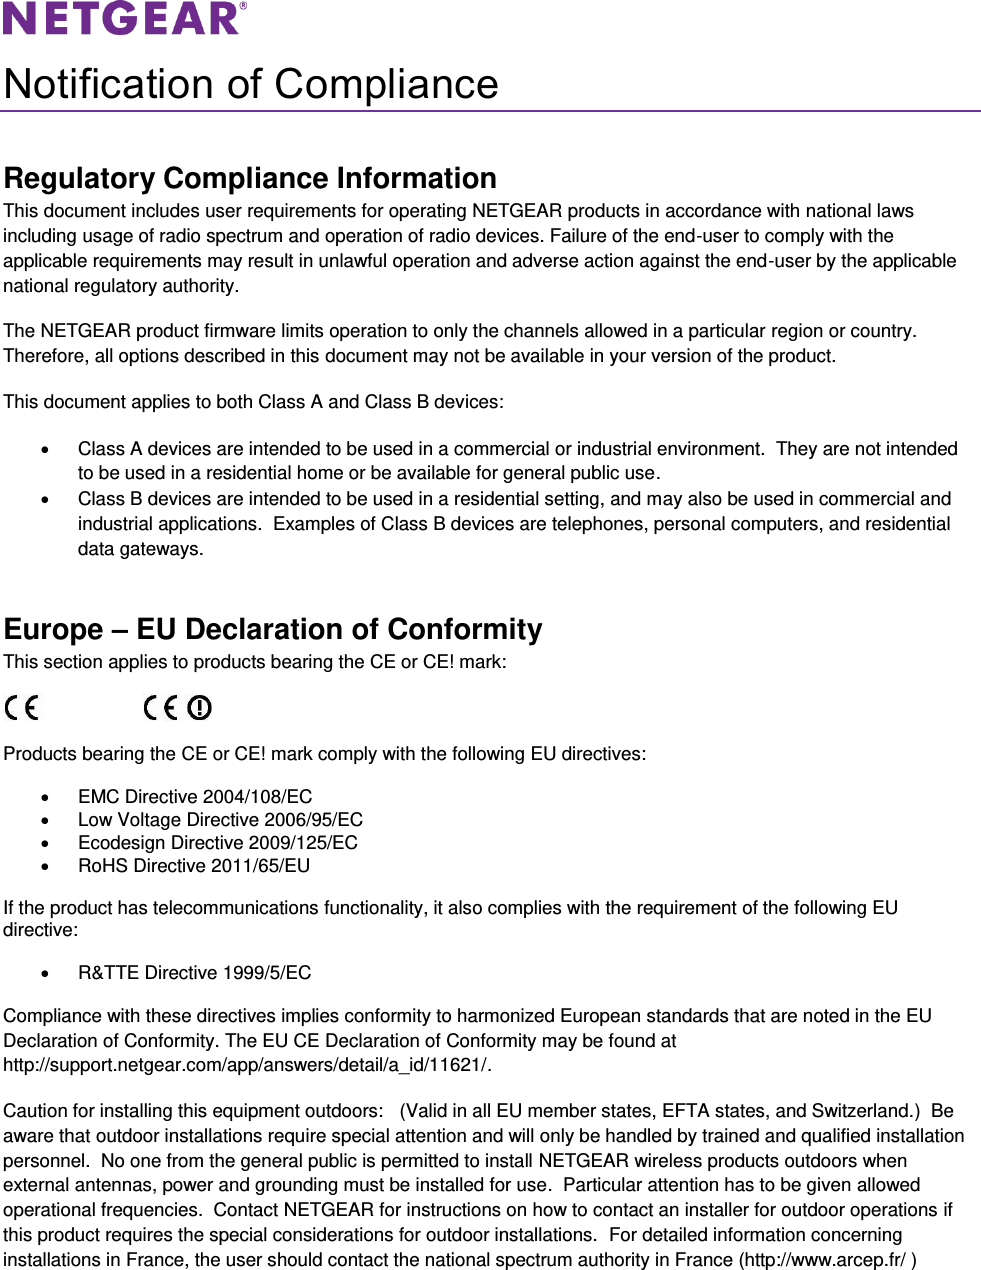   Notification of Compliance Regulatory Compliance Information This document includes user requirements for operating NETGEAR products in accordance with national laws including usage of radio spectrum and operation of radio devices. Failure of the end-user to comply with the applicable requirements may result in unlawful operation and adverse action against the end-user by the applicable national regulatory authority. The NETGEAR product firmware limits operation to only the channels allowed in a particular region or country. Therefore, all options described in this document may not be available in your version of the product. This document applies to both Class A and Class B devices:   Class A devices are intended to be used in a commercial or industrial environment.  They are not intended to be used in a residential home or be available for general public use.   Class B devices are intended to be used in a residential setting, and may also be used in commercial and industrial applications.  Examples of Class B devices are telephones, personal computers, and residential data gateways. Europe – EU Declaration of Conformity This section applies to products bearing the CE or CE! mark:                      Products bearing the CE or CE! mark comply with the following EU directives:   EMC Directive 2004/108/EC   Low Voltage Directive 2006/95/EC   Ecodesign Directive 2009/125/EC   RoHS Directive 2011/65/EU If the product has telecommunications functionality, it also complies with the requirement of the following EU directive:   R&amp;TTE Directive 1999/5/EC Compliance with these directives implies conformity to harmonized European standards that are noted in the EU Declaration of Conformity. The EU CE Declaration of Conformity may be found at http://support.netgear.com/app/answers/detail/a_id/11621/. Caution for installing this equipment outdoors:   (Valid in all EU member states, EFTA states, and Switzerland.)  Be aware that outdoor installations require special attention and will only be handled by trained and qualified installation personnel.  No one from the general public is permitted to install NETGEAR wireless products outdoors when external antennas, power and grounding must be installed for use.  Particular attention has to be given allowed operational frequencies.  Contact NETGEAR for instructions on how to contact an installer for outdoor operations if this product requires the special considerations for outdoor installations.  For detailed information concerning installations in France, the user should contact the national spectrum authority in France (http://www.arcep.fr/ )  